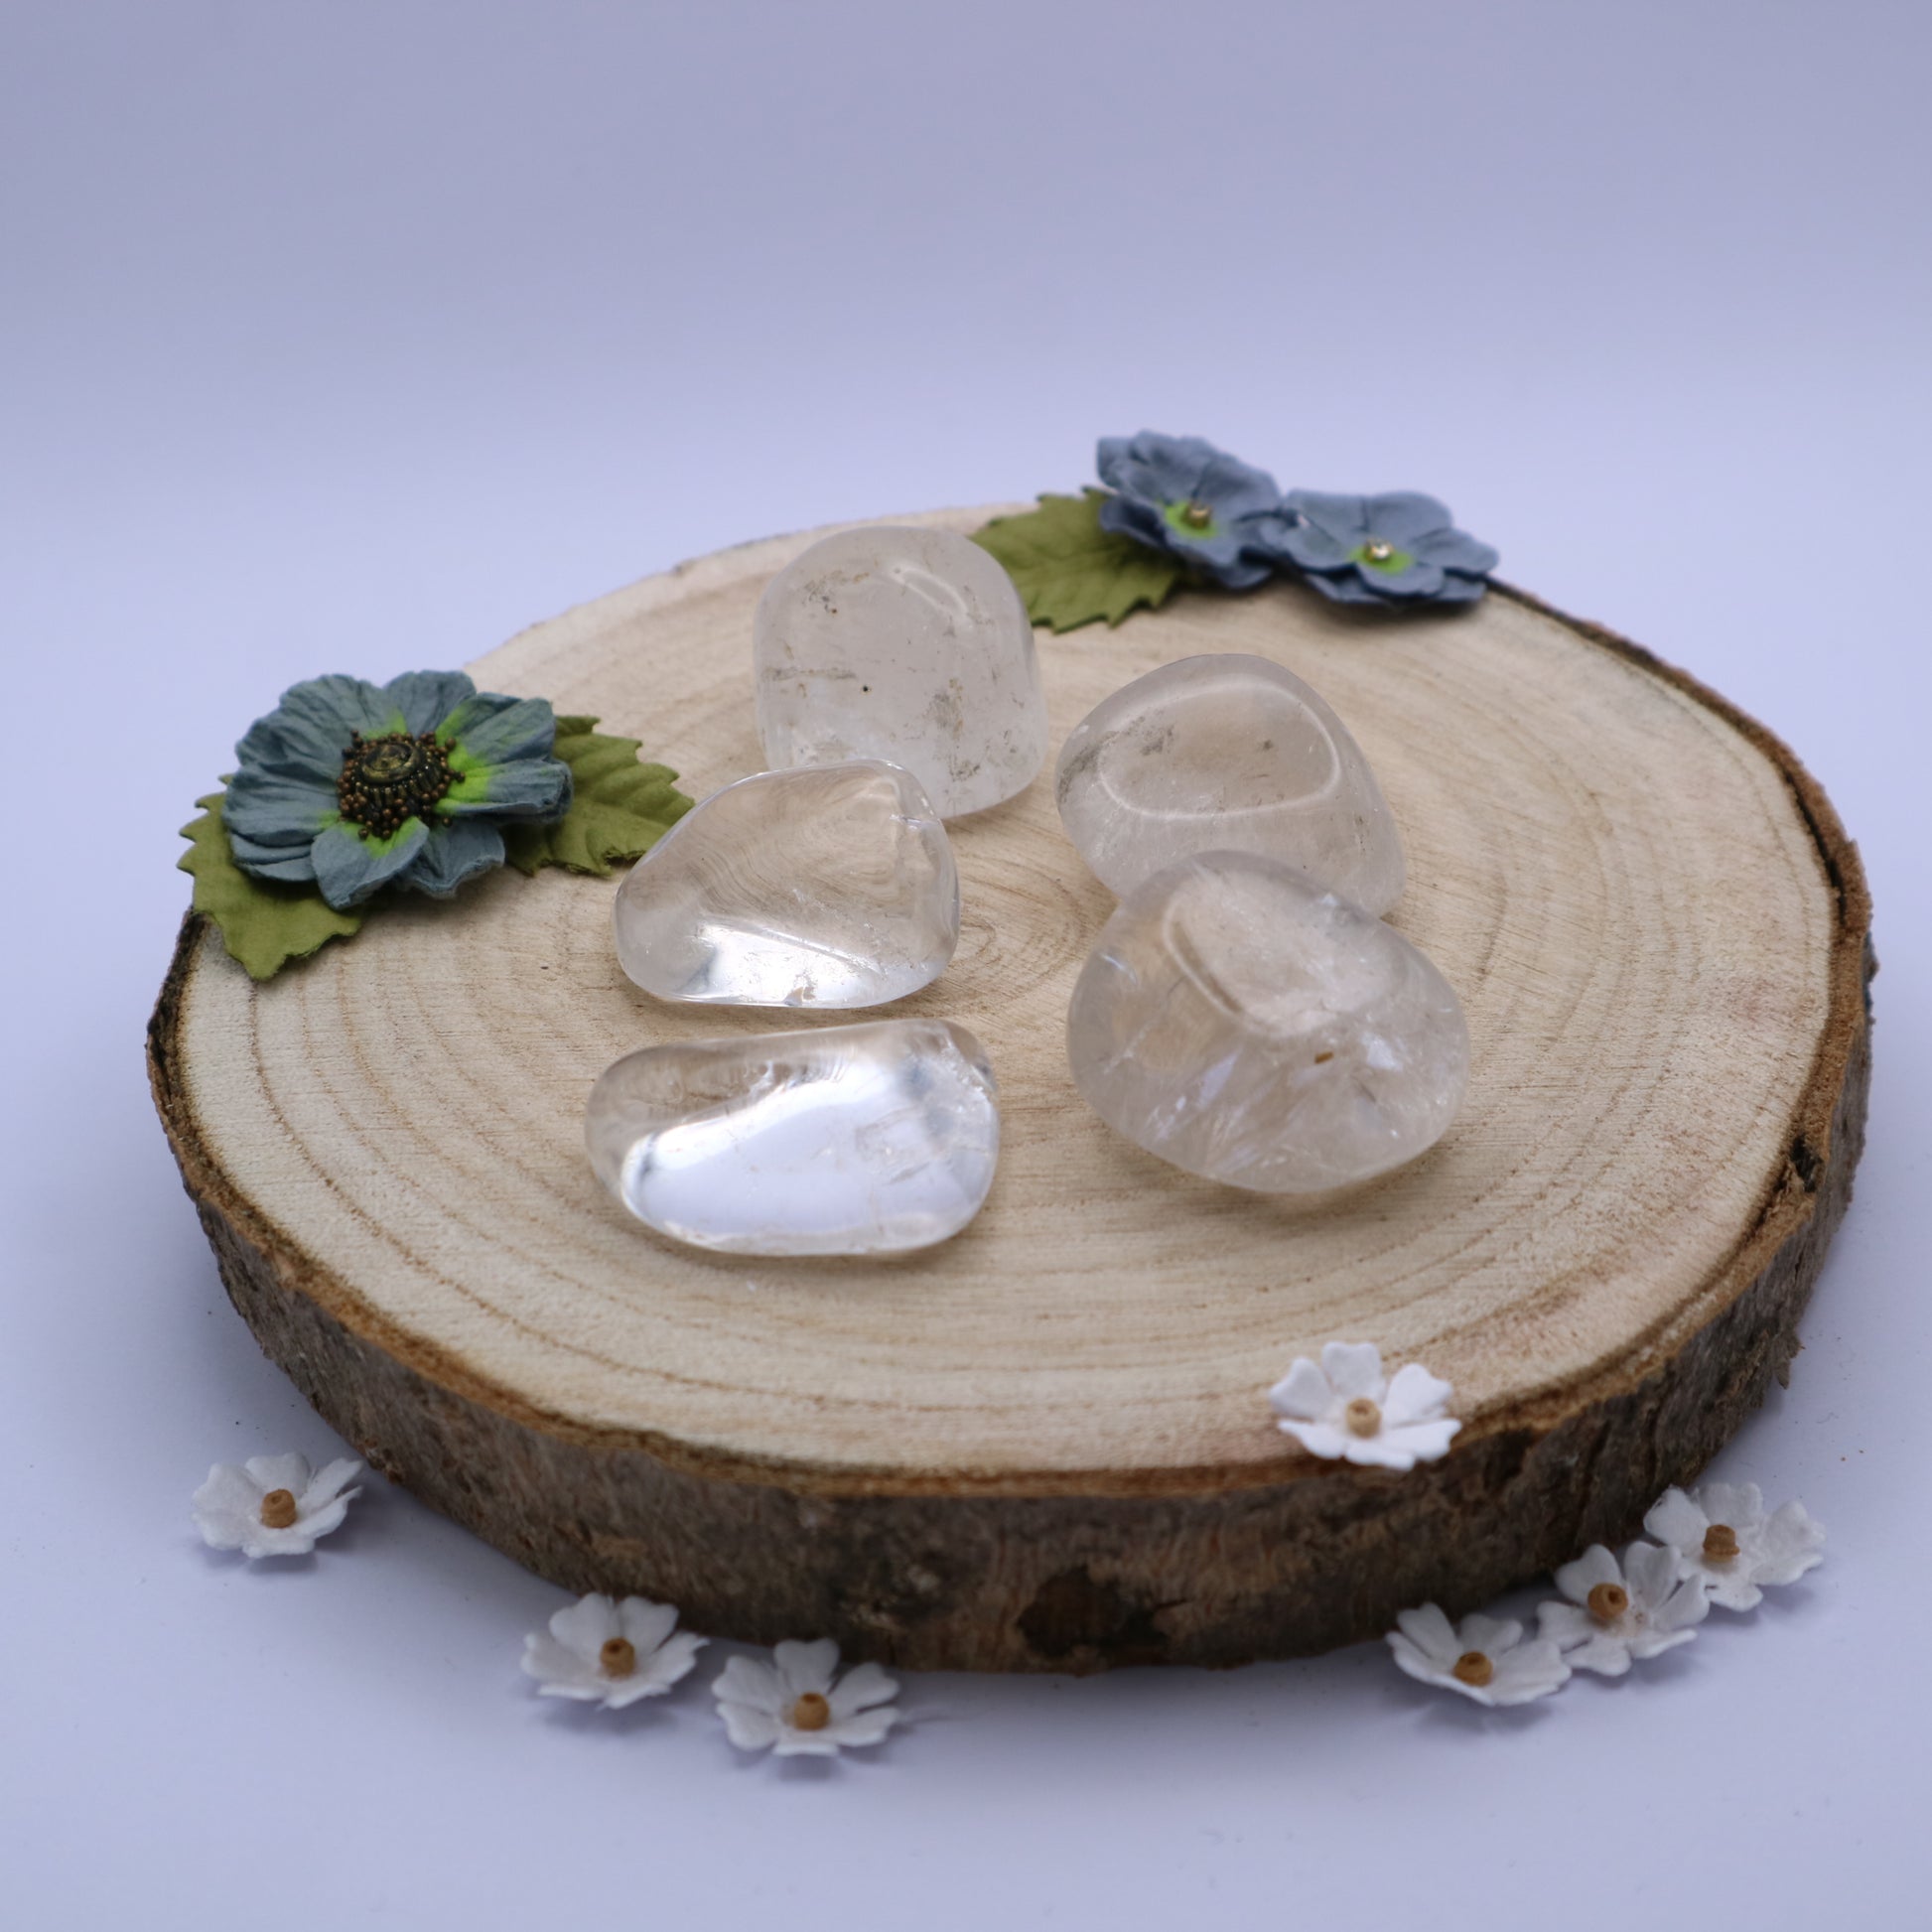 Five pieces of Rock Crystal crystals displayed on a piece of wood surrounded by flowers